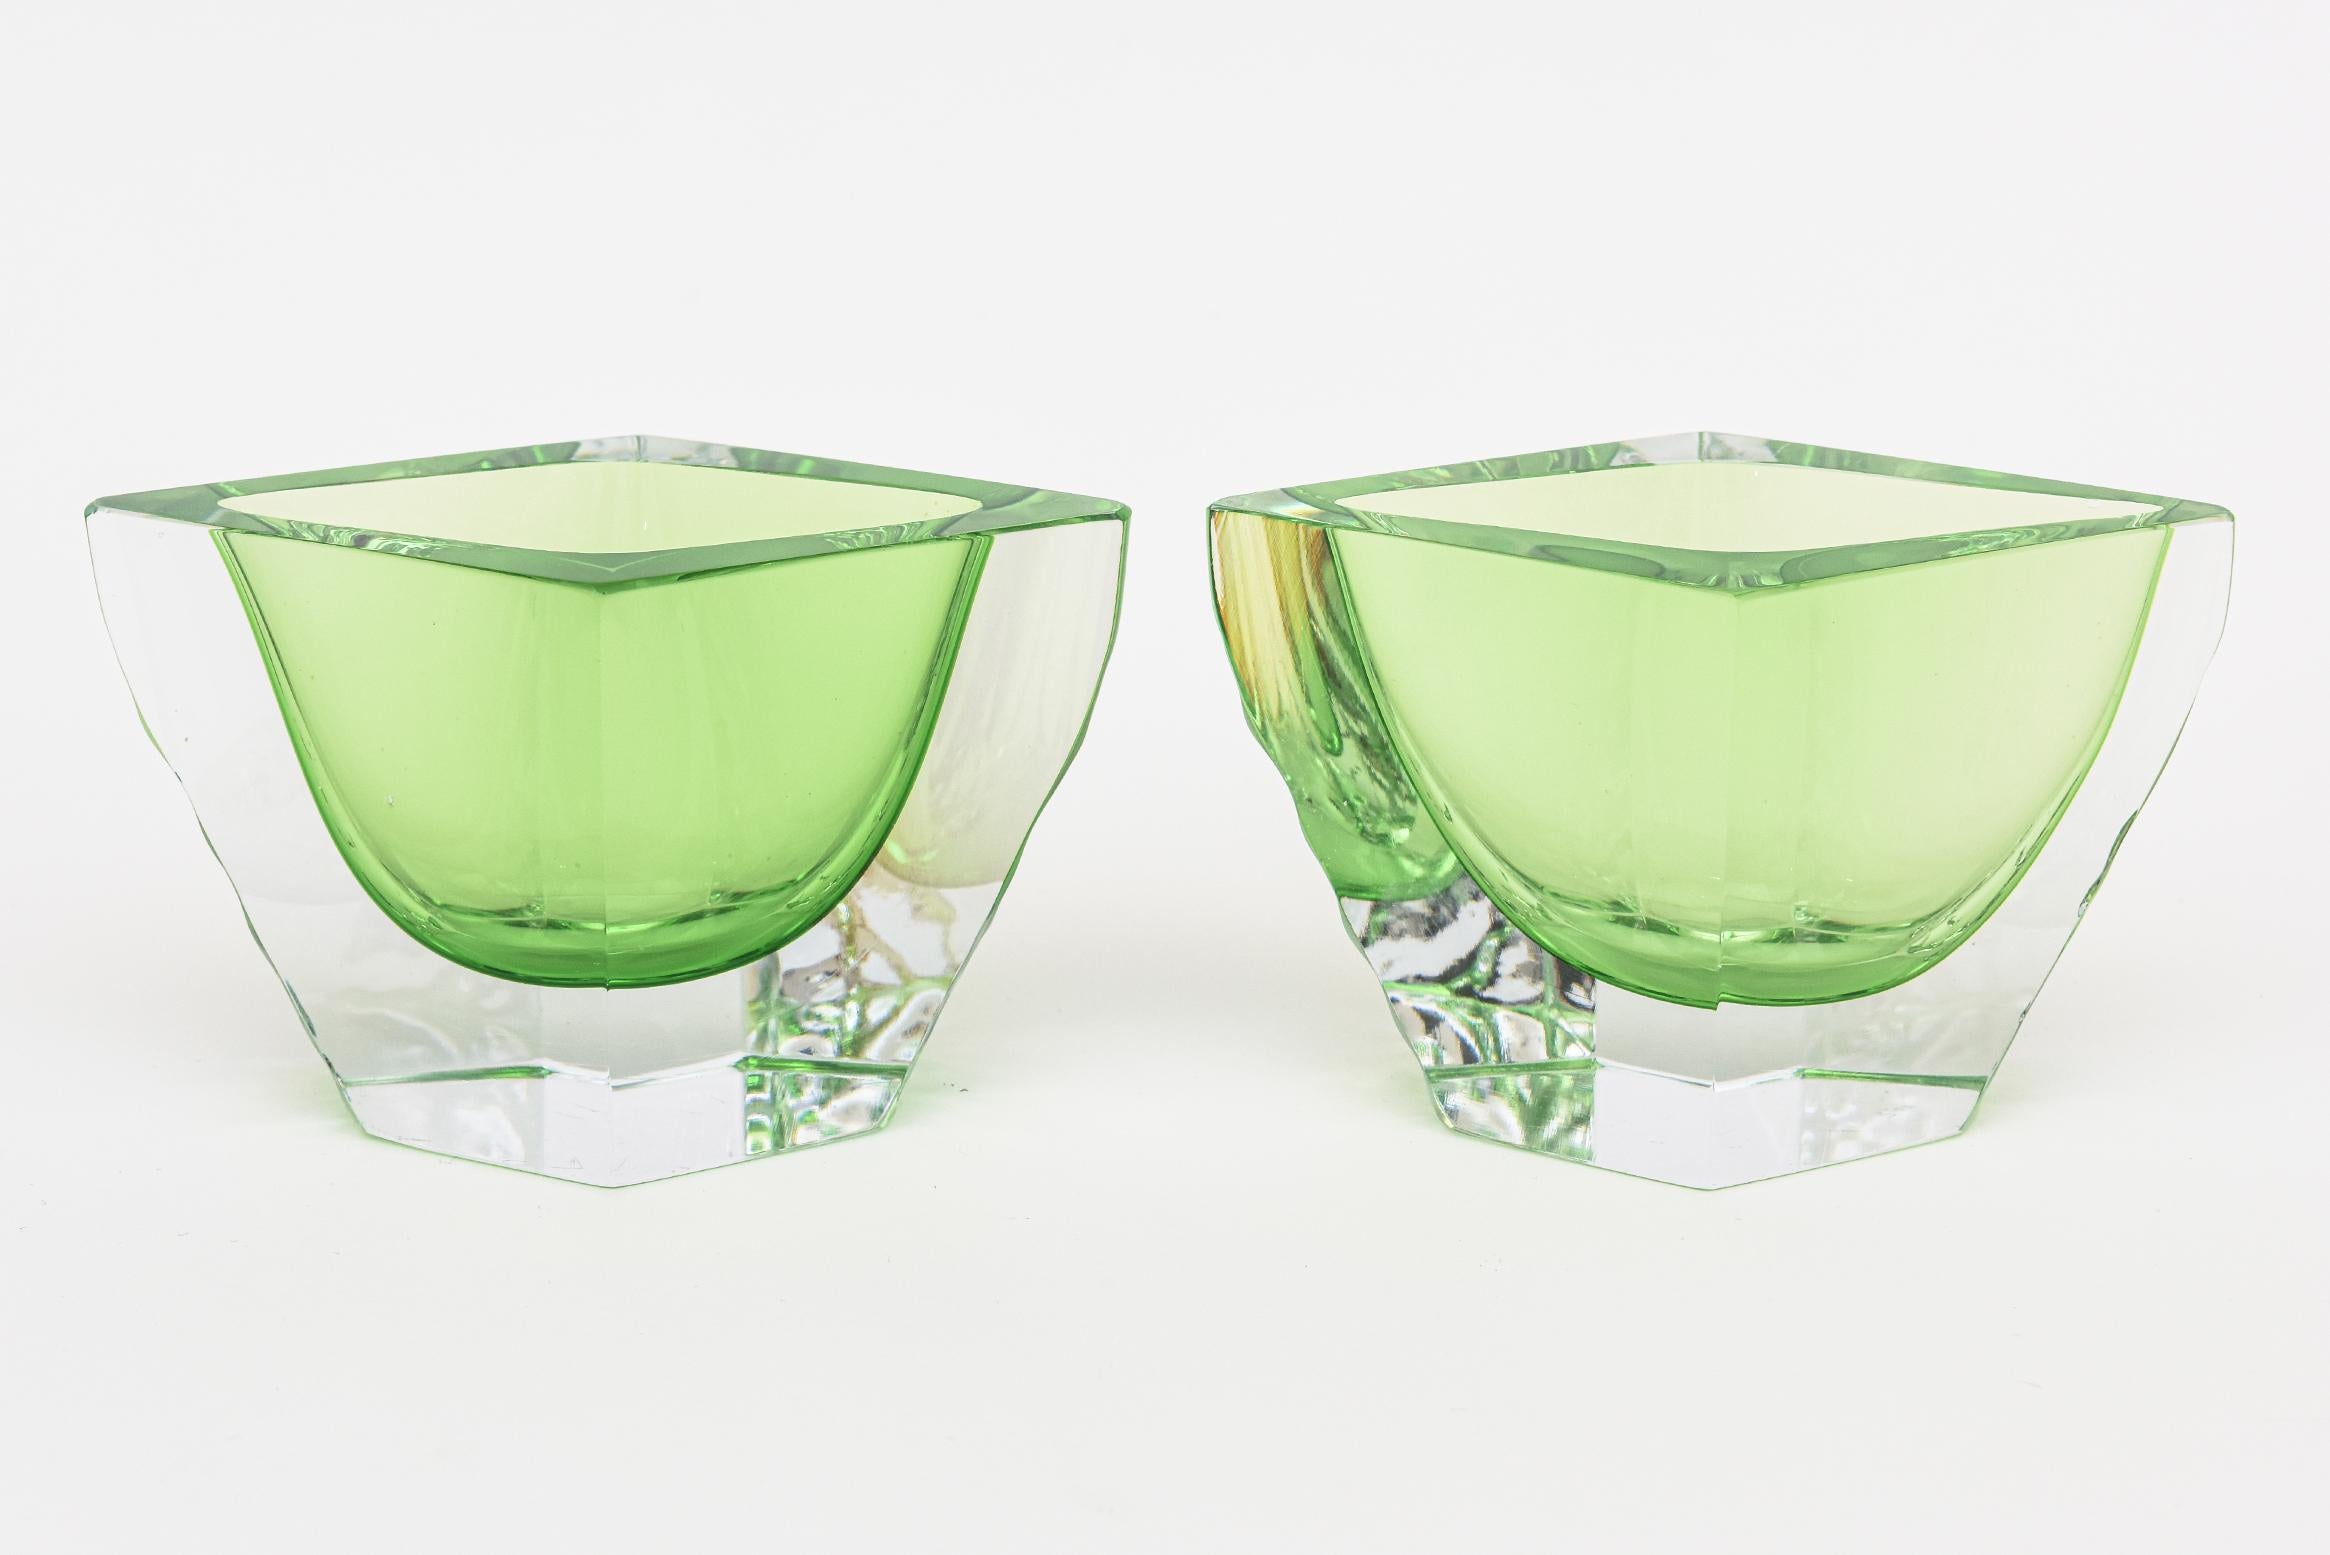 This pair of stunning jewel toned vintage Murano bowls are the most spectacular color of kelly green meets a lighter green with clear. They are by Alessandro Mandruzzaato and are very unusual in their form. They are angled and have a flat cut